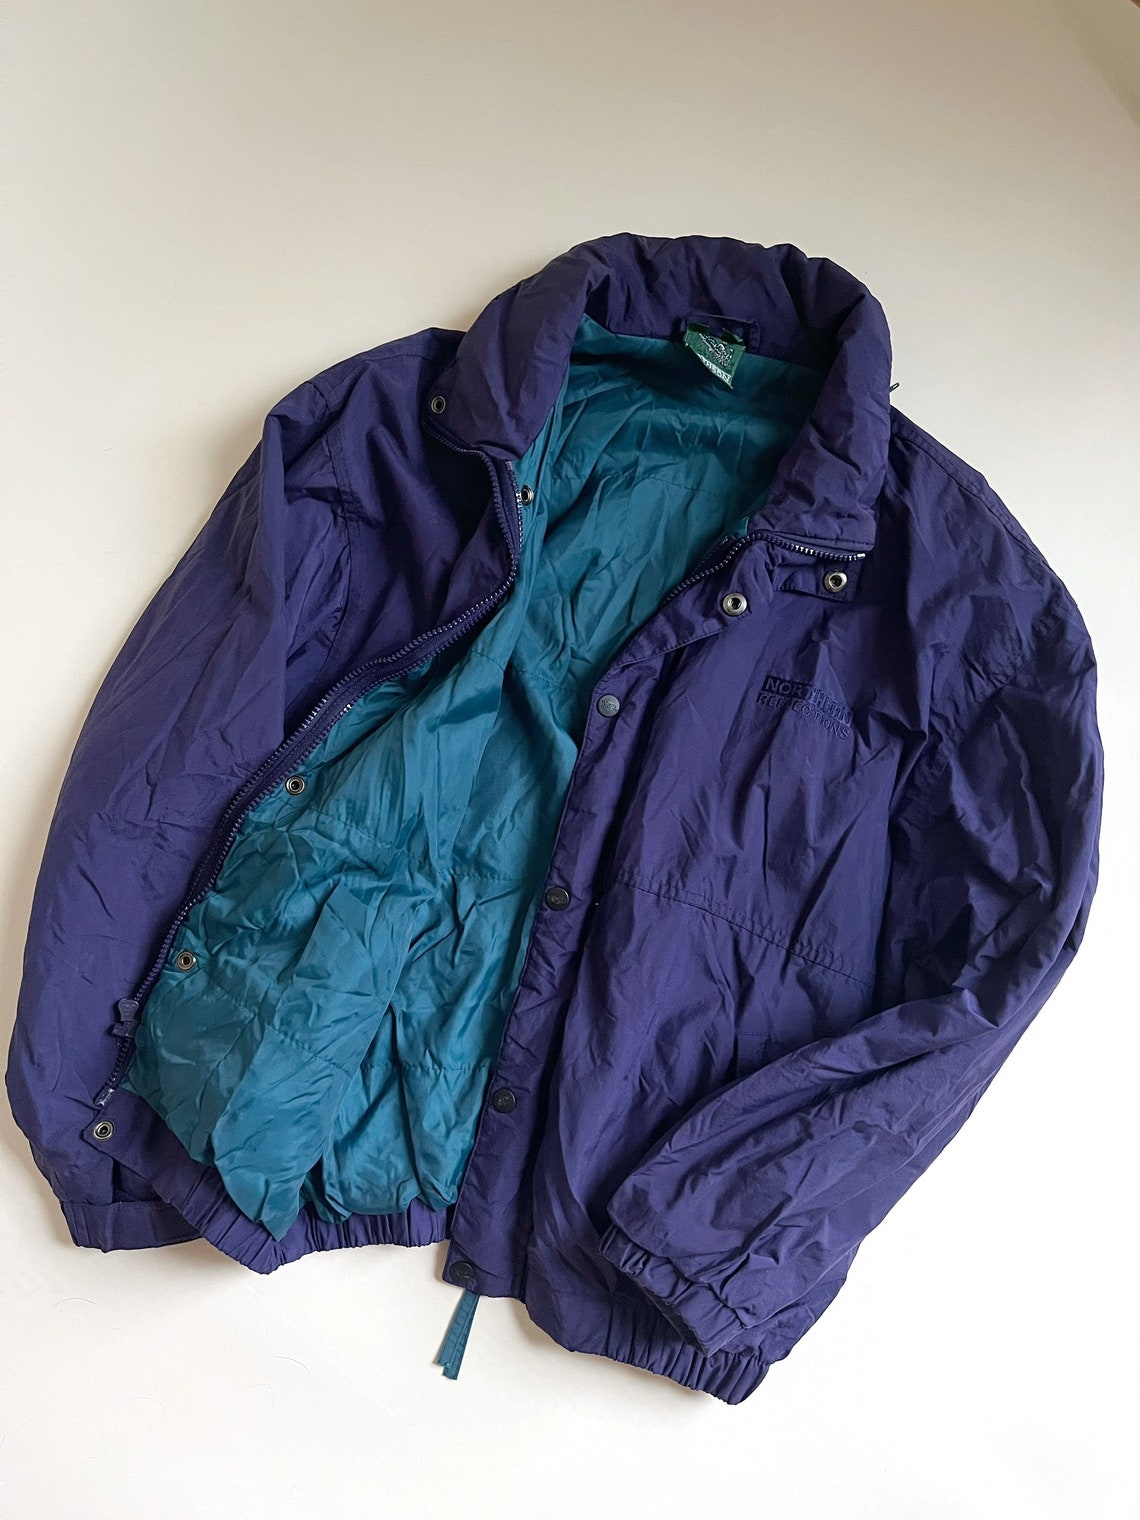 90s Northern Reflections Jacket - Etsy